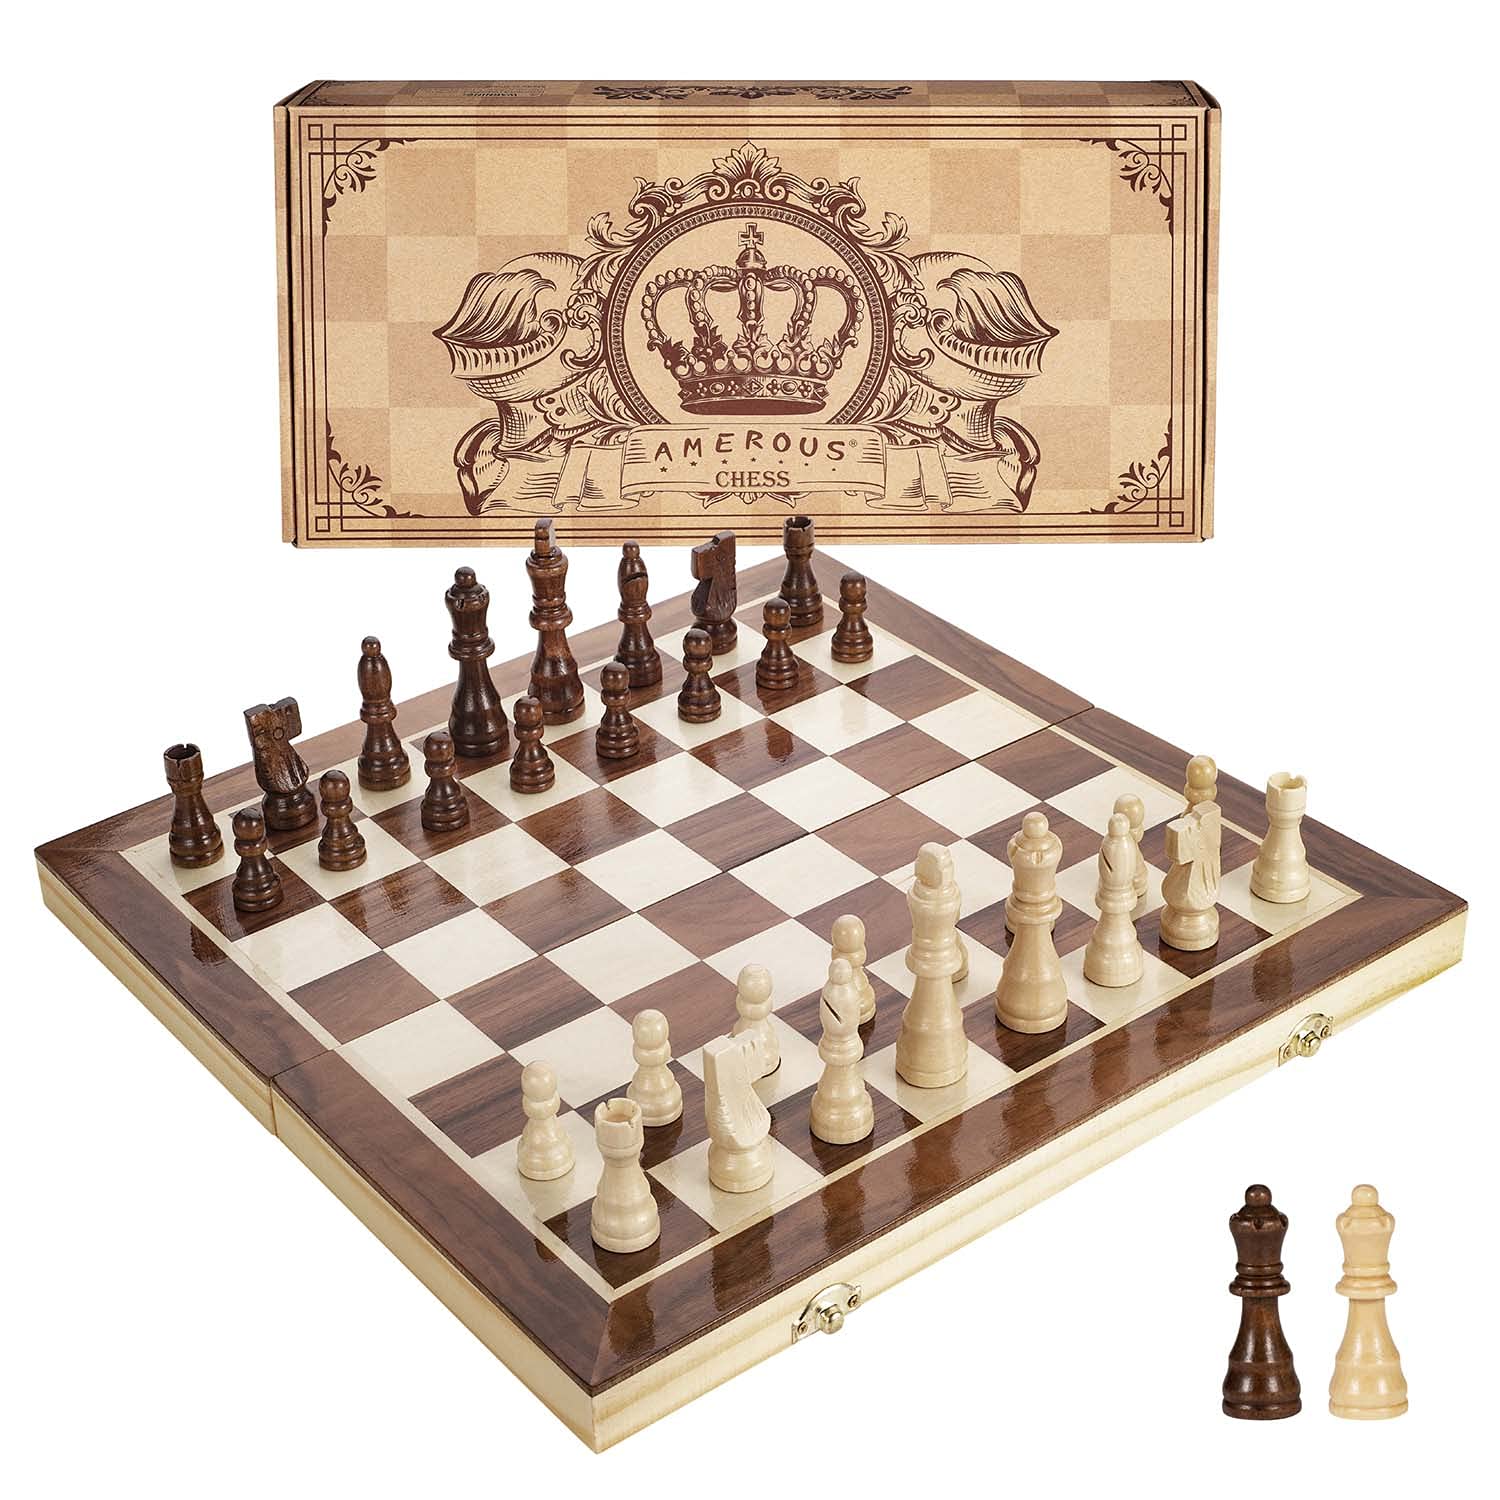 Amerous 15 Inches Magnetic Wooden Chess Set - 2 Extra Queens - Folding Board, Handmade Portable Travel Chess Board Game Sets with Game Pieces Storage Slots - Beginner Chess Set for Kids and Adults